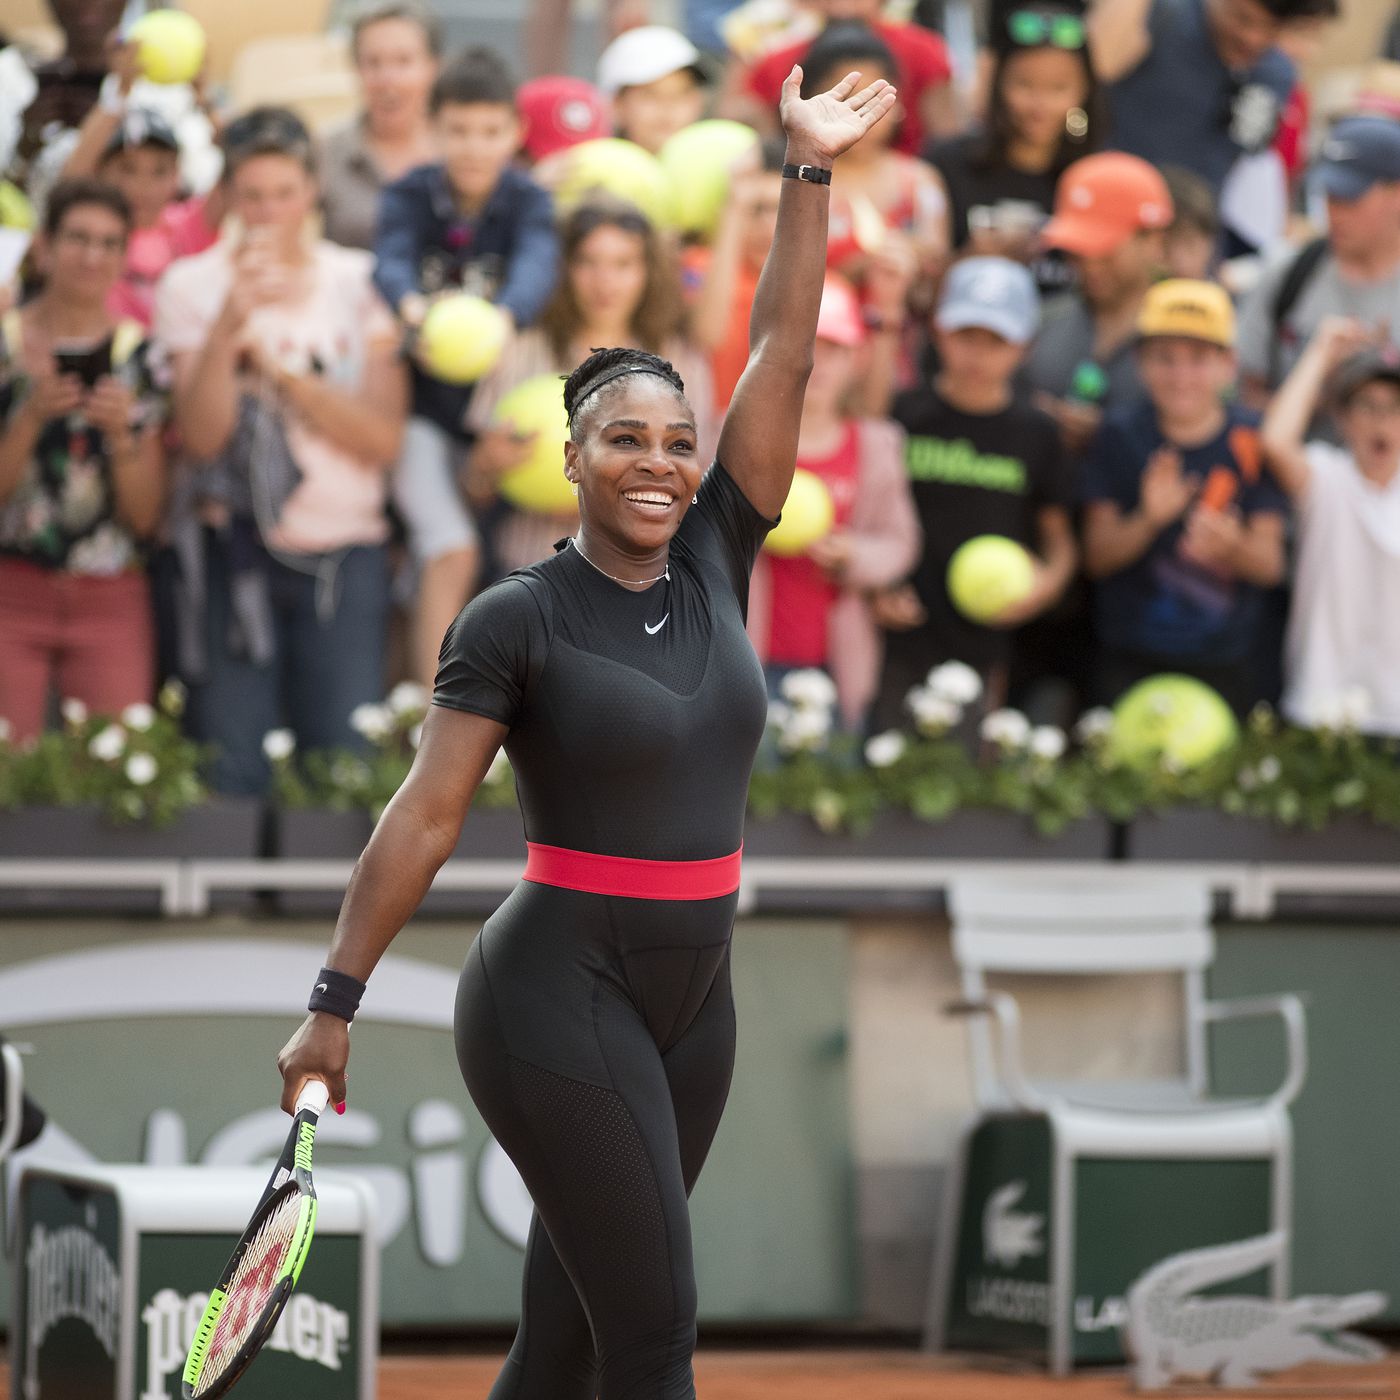 The French Open's Serena Williams catsuit exposes elitism - Vox